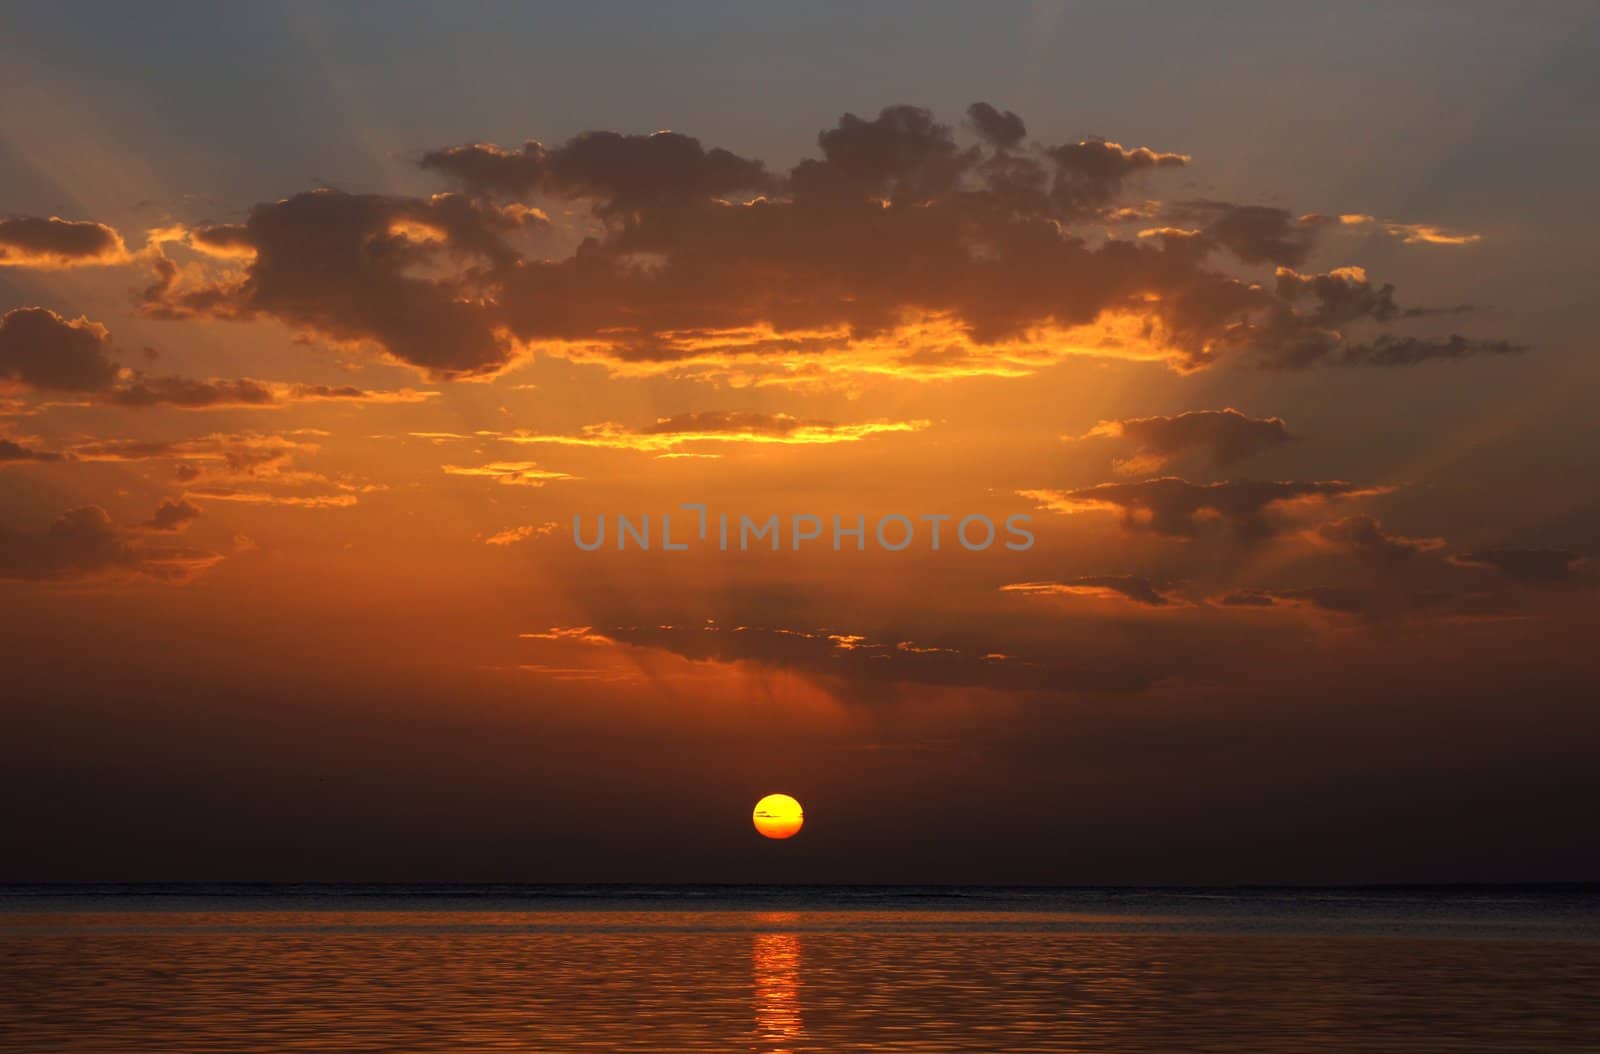 Sunrising over the Red sea in Egypt